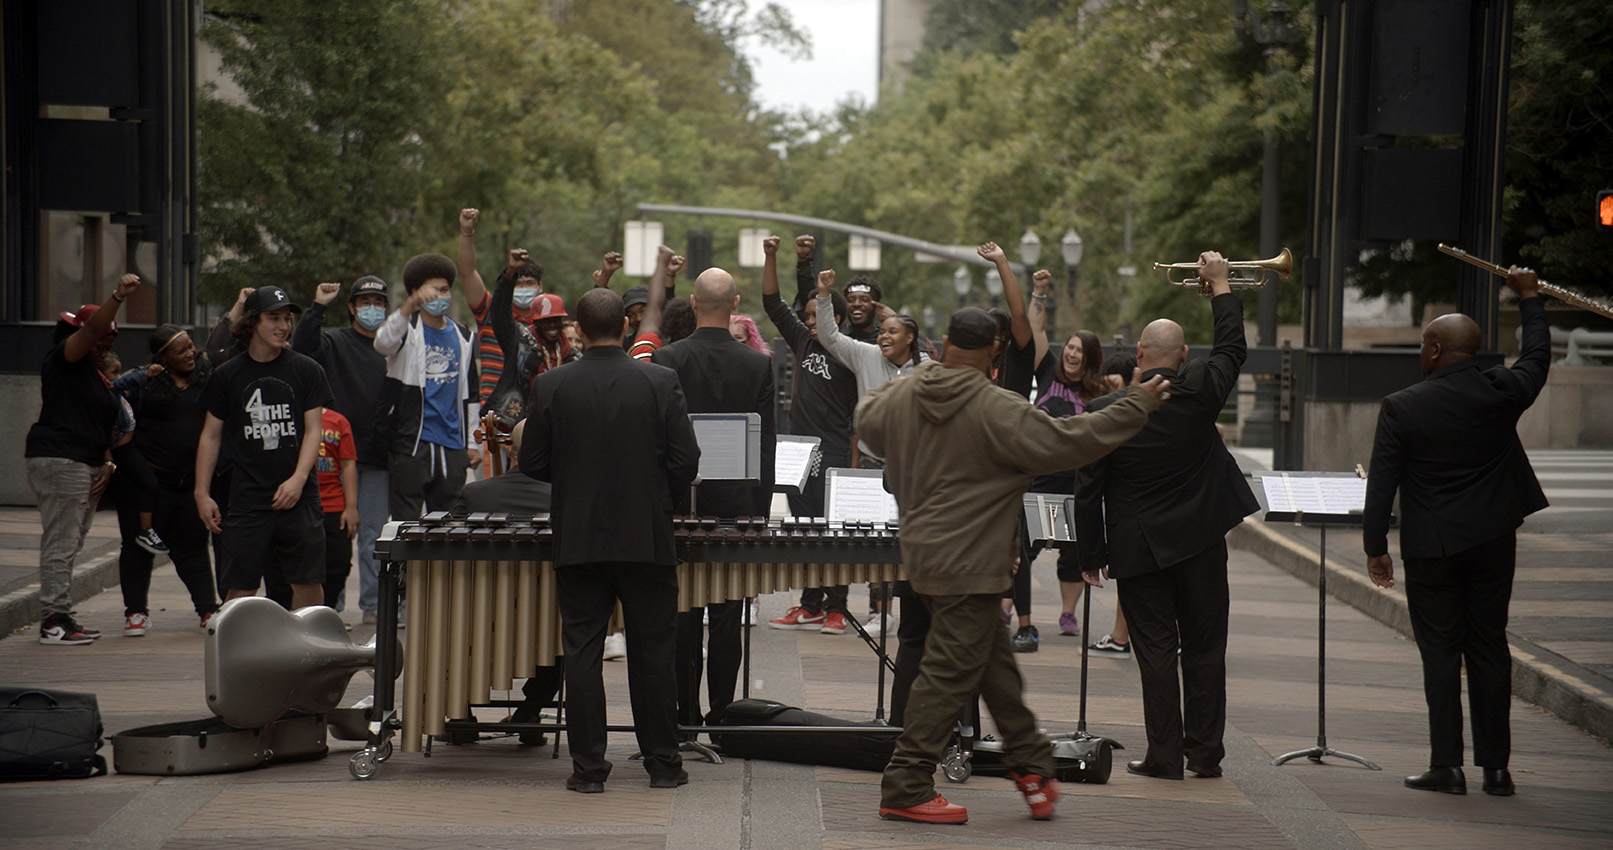 Image of musicians playing music, cheered on by fans.